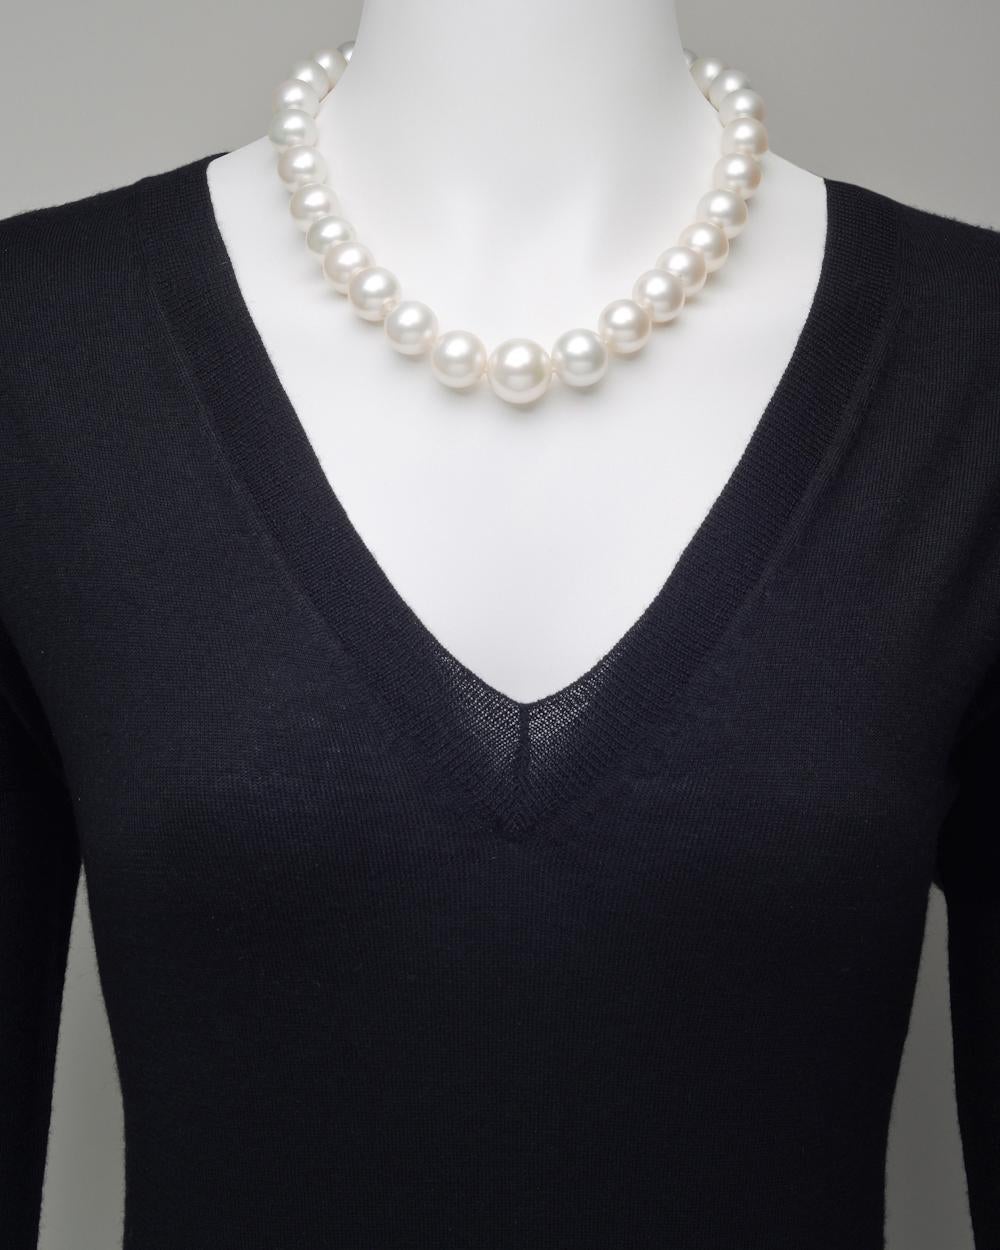 Single strand South Sea pearl necklace, composed of 31 fine South Sea cultured pearls ranging from 18.9 to 13.8mm in diameter, strung on a silk cord and secured by a diamond and platinum ball clasp pavé-set with approximately 6.91 total carats of